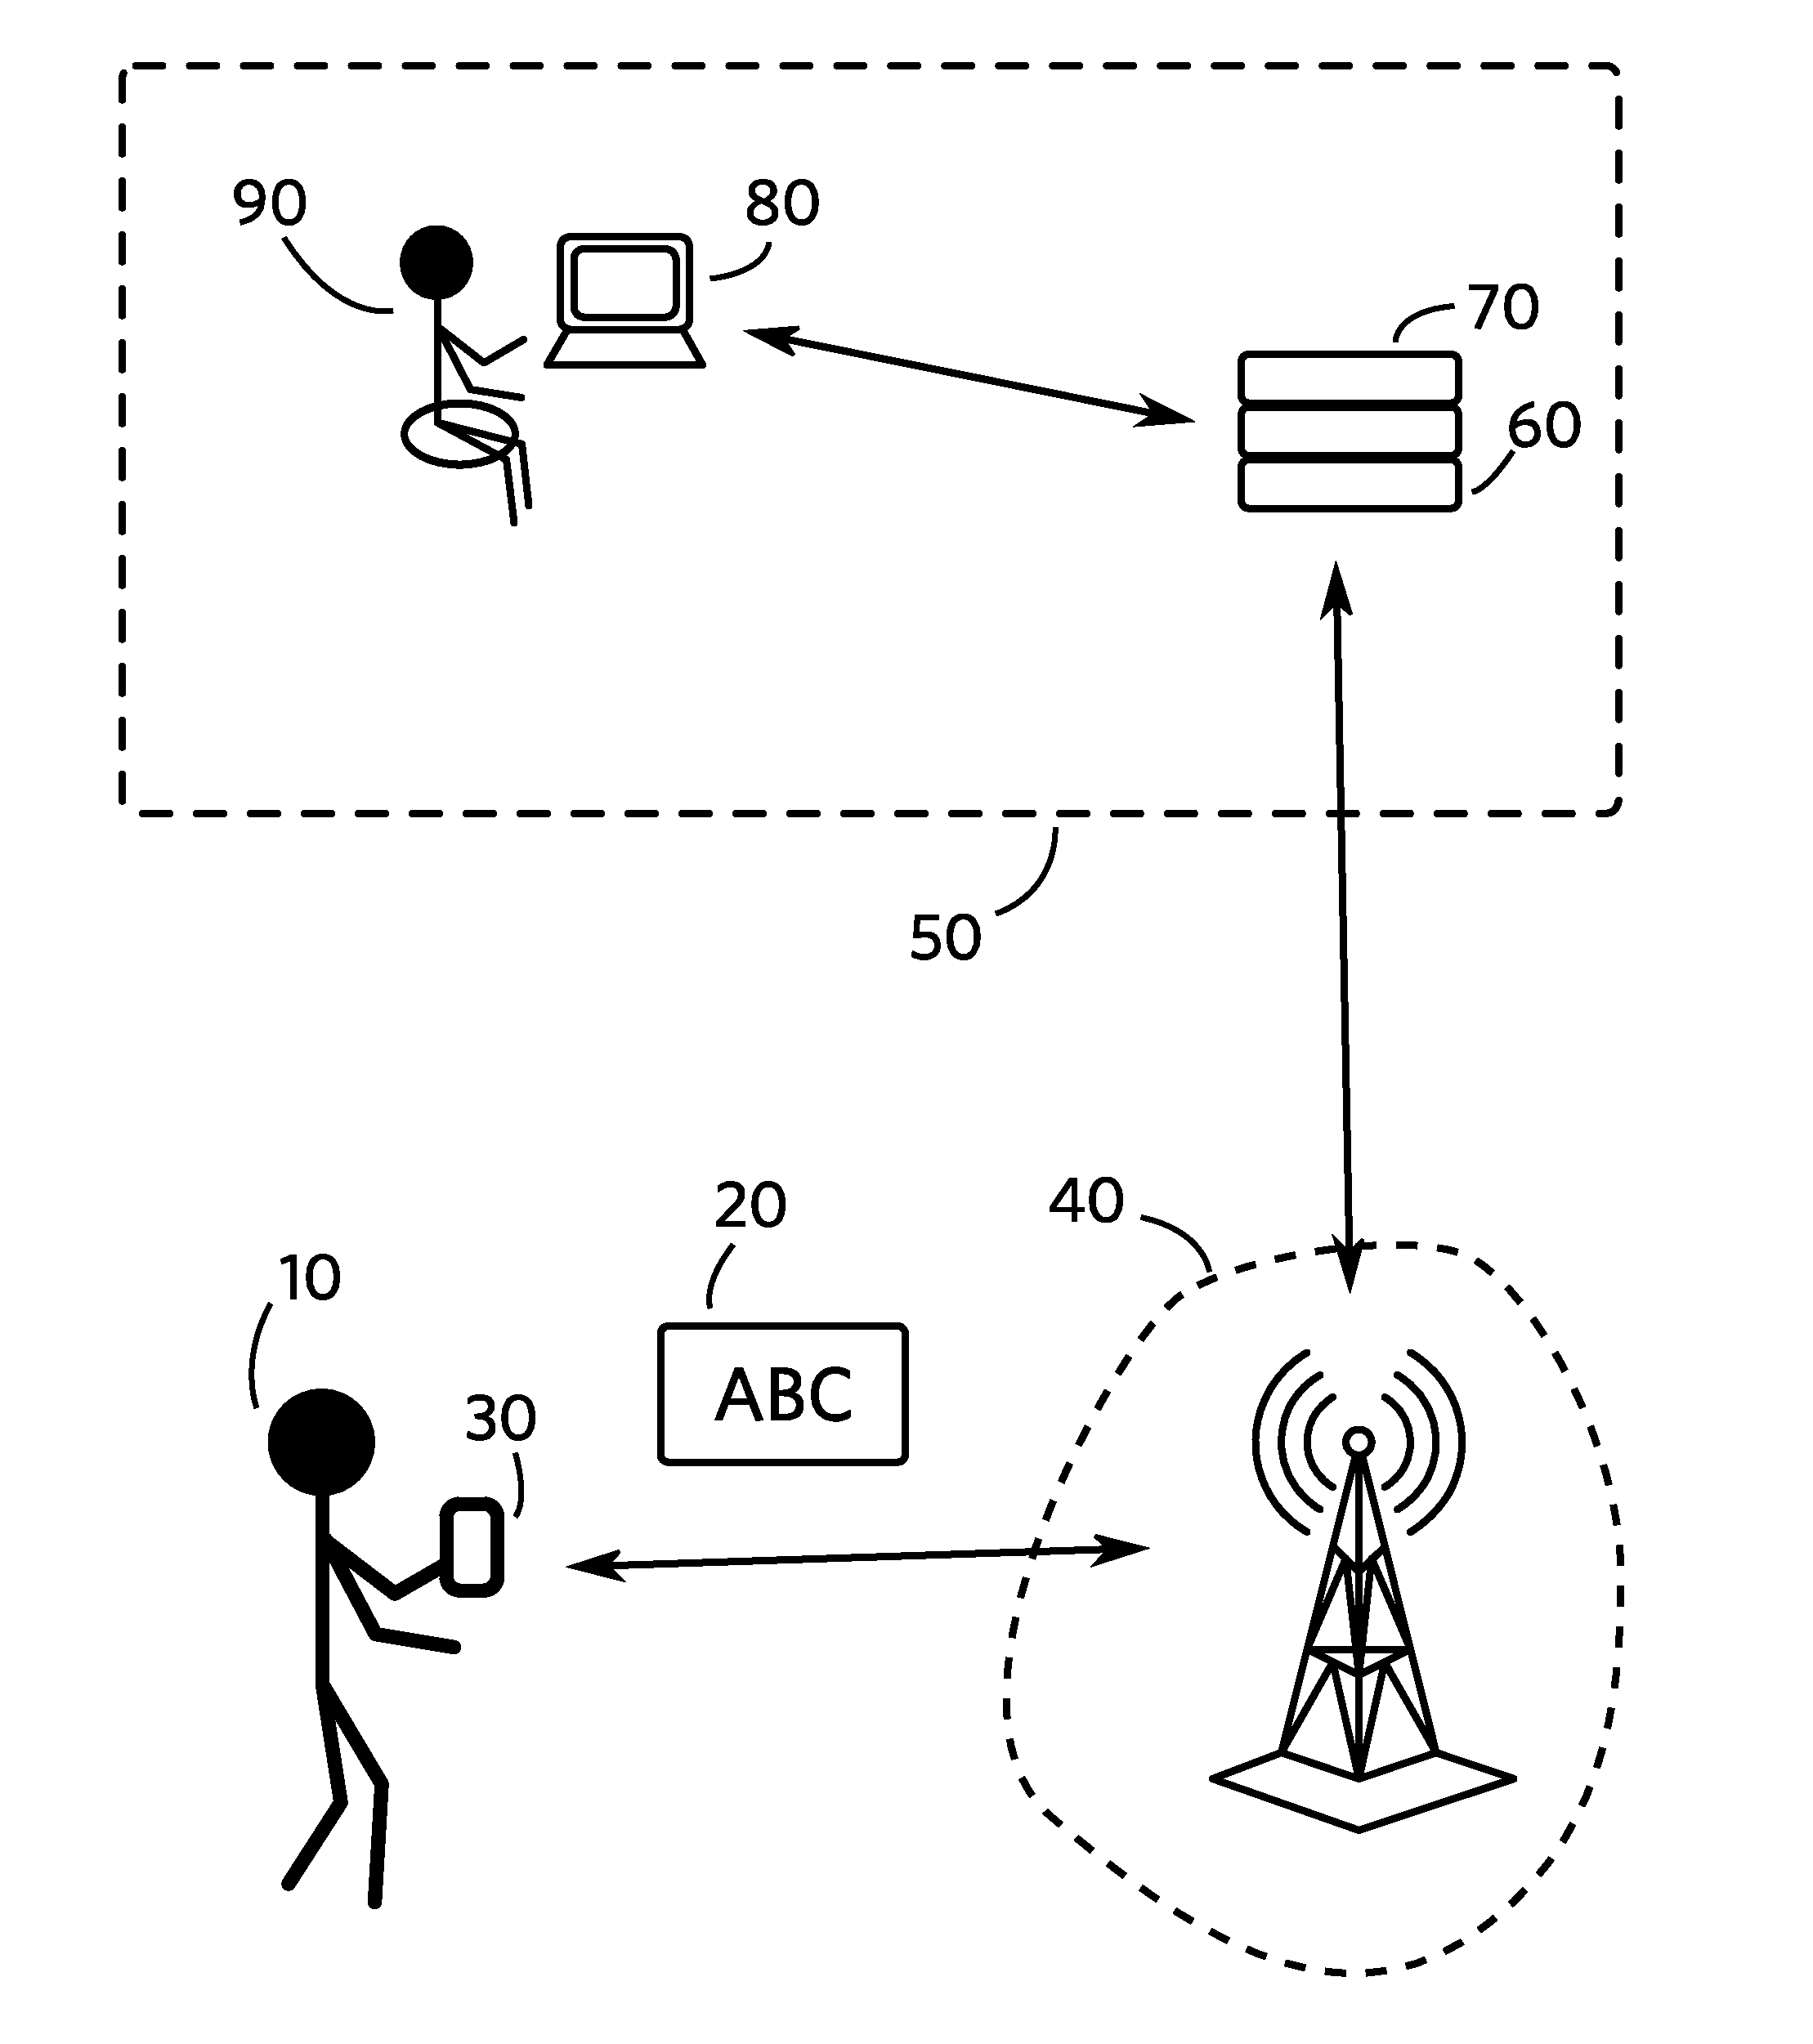 Method of Assistance for the Visually Impaired